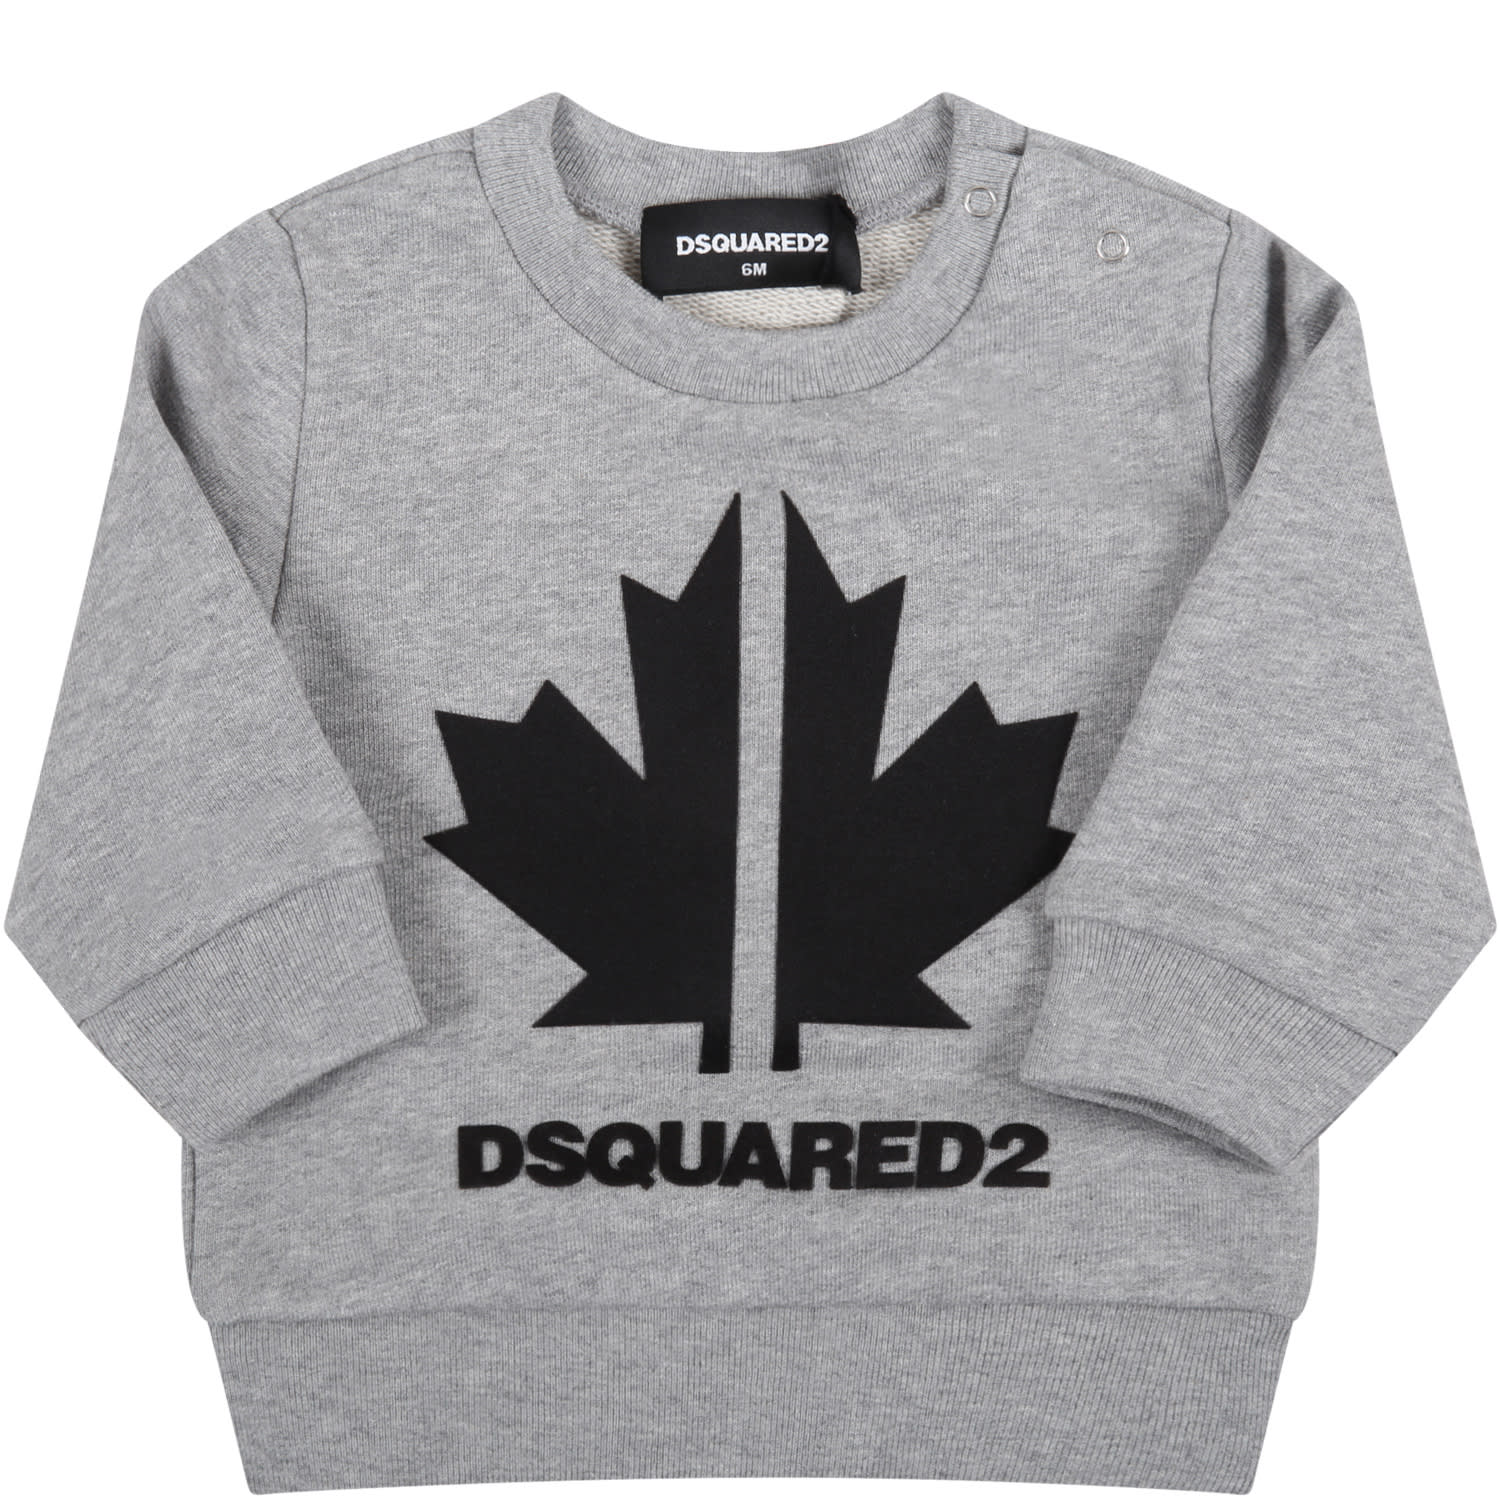 Dsquared2 Grey Sweatshirt For Baby Boy With Maple Leaf